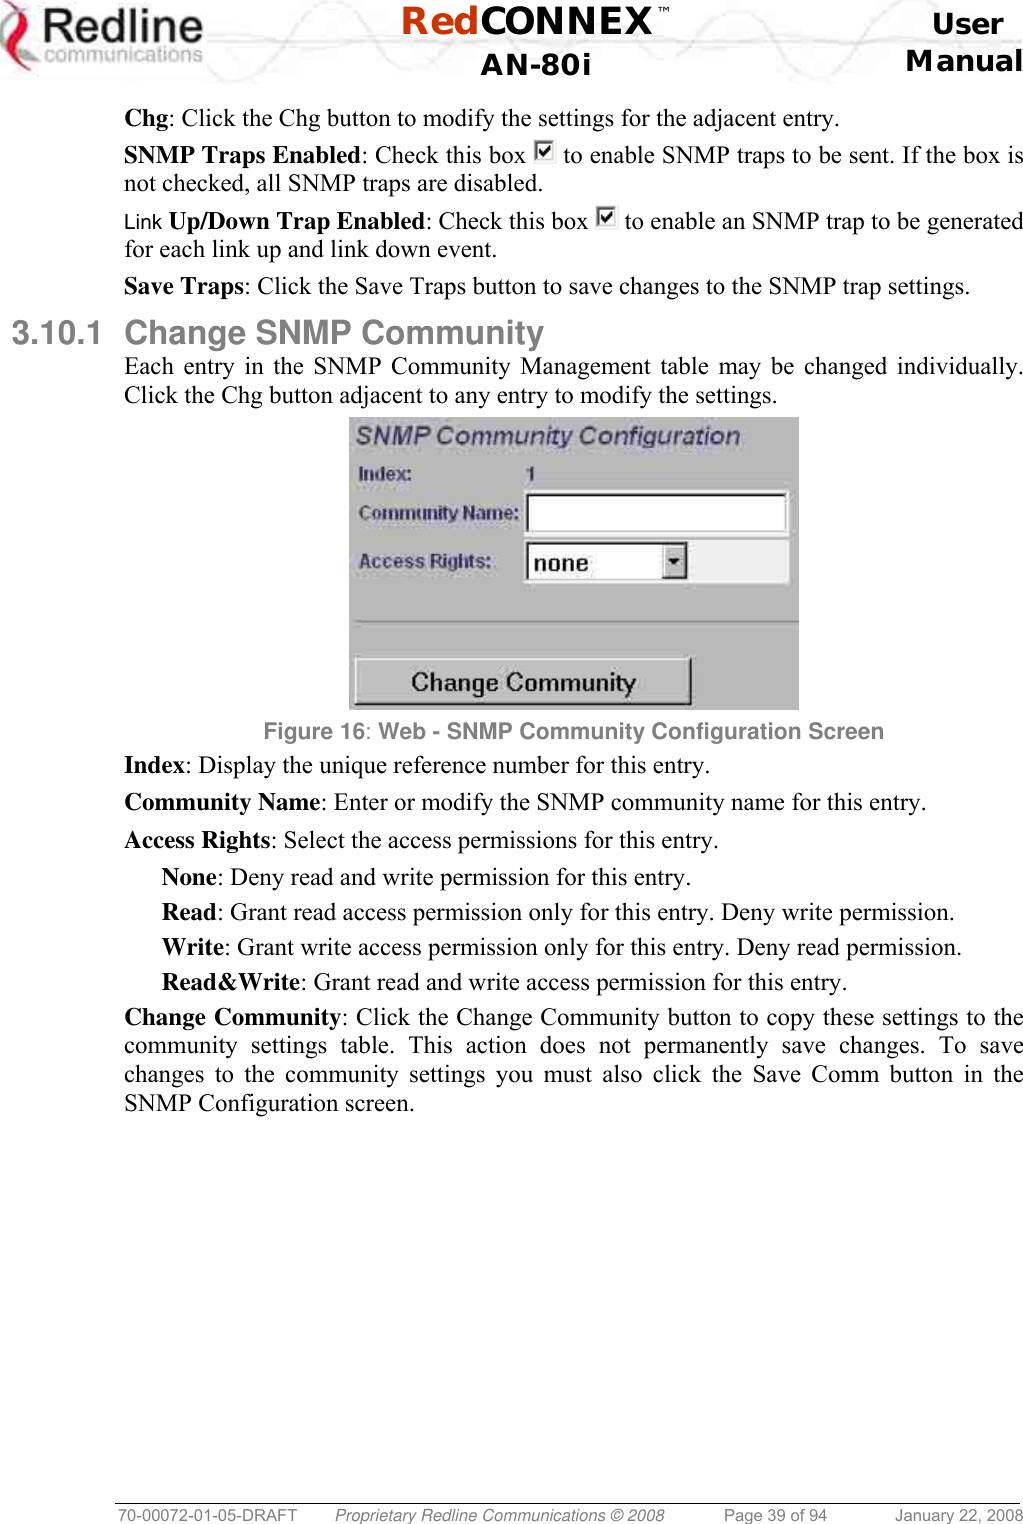  RedCONNEX™    User  AN-80i Manual  70-00072-01-05-DRAFT  Proprietary Redline Communications © 2008  Page 39 of 94  January 22, 2008 Chg: Click the Chg button to modify the settings for the adjacent entry. SNMP Traps Enabled: Check this box   to enable SNMP traps to be sent. If the box is not checked, all SNMP traps are disabled. Link Up/Down Trap Enabled: Check this box   to enable an SNMP trap to be generated for each link up and link down event. Save Traps: Click the Save Traps button to save changes to the SNMP trap settings. 3.10.1  Change SNMP Community Each entry in the SNMP Community Management table may be changed individually. Click the Chg button adjacent to any entry to modify the settings.  Figure 16: Web - SNMP Community Configuration Screen  Index: Display the unique reference number for this entry. Community Name: Enter or modify the SNMP community name for this entry. Access Rights: Select the access permissions for this entry. None: Deny read and write permission for this entry. Read: Grant read access permission only for this entry. Deny write permission. Write: Grant write access permission only for this entry. Deny read permission. Read&amp;Write: Grant read and write access permission for this entry. Change Community: Click the Change Community button to copy these settings to the community settings table. This action does not permanently save changes. To save changes to the community settings you must also click the Save Comm button in the SNMP Configuration screen. 